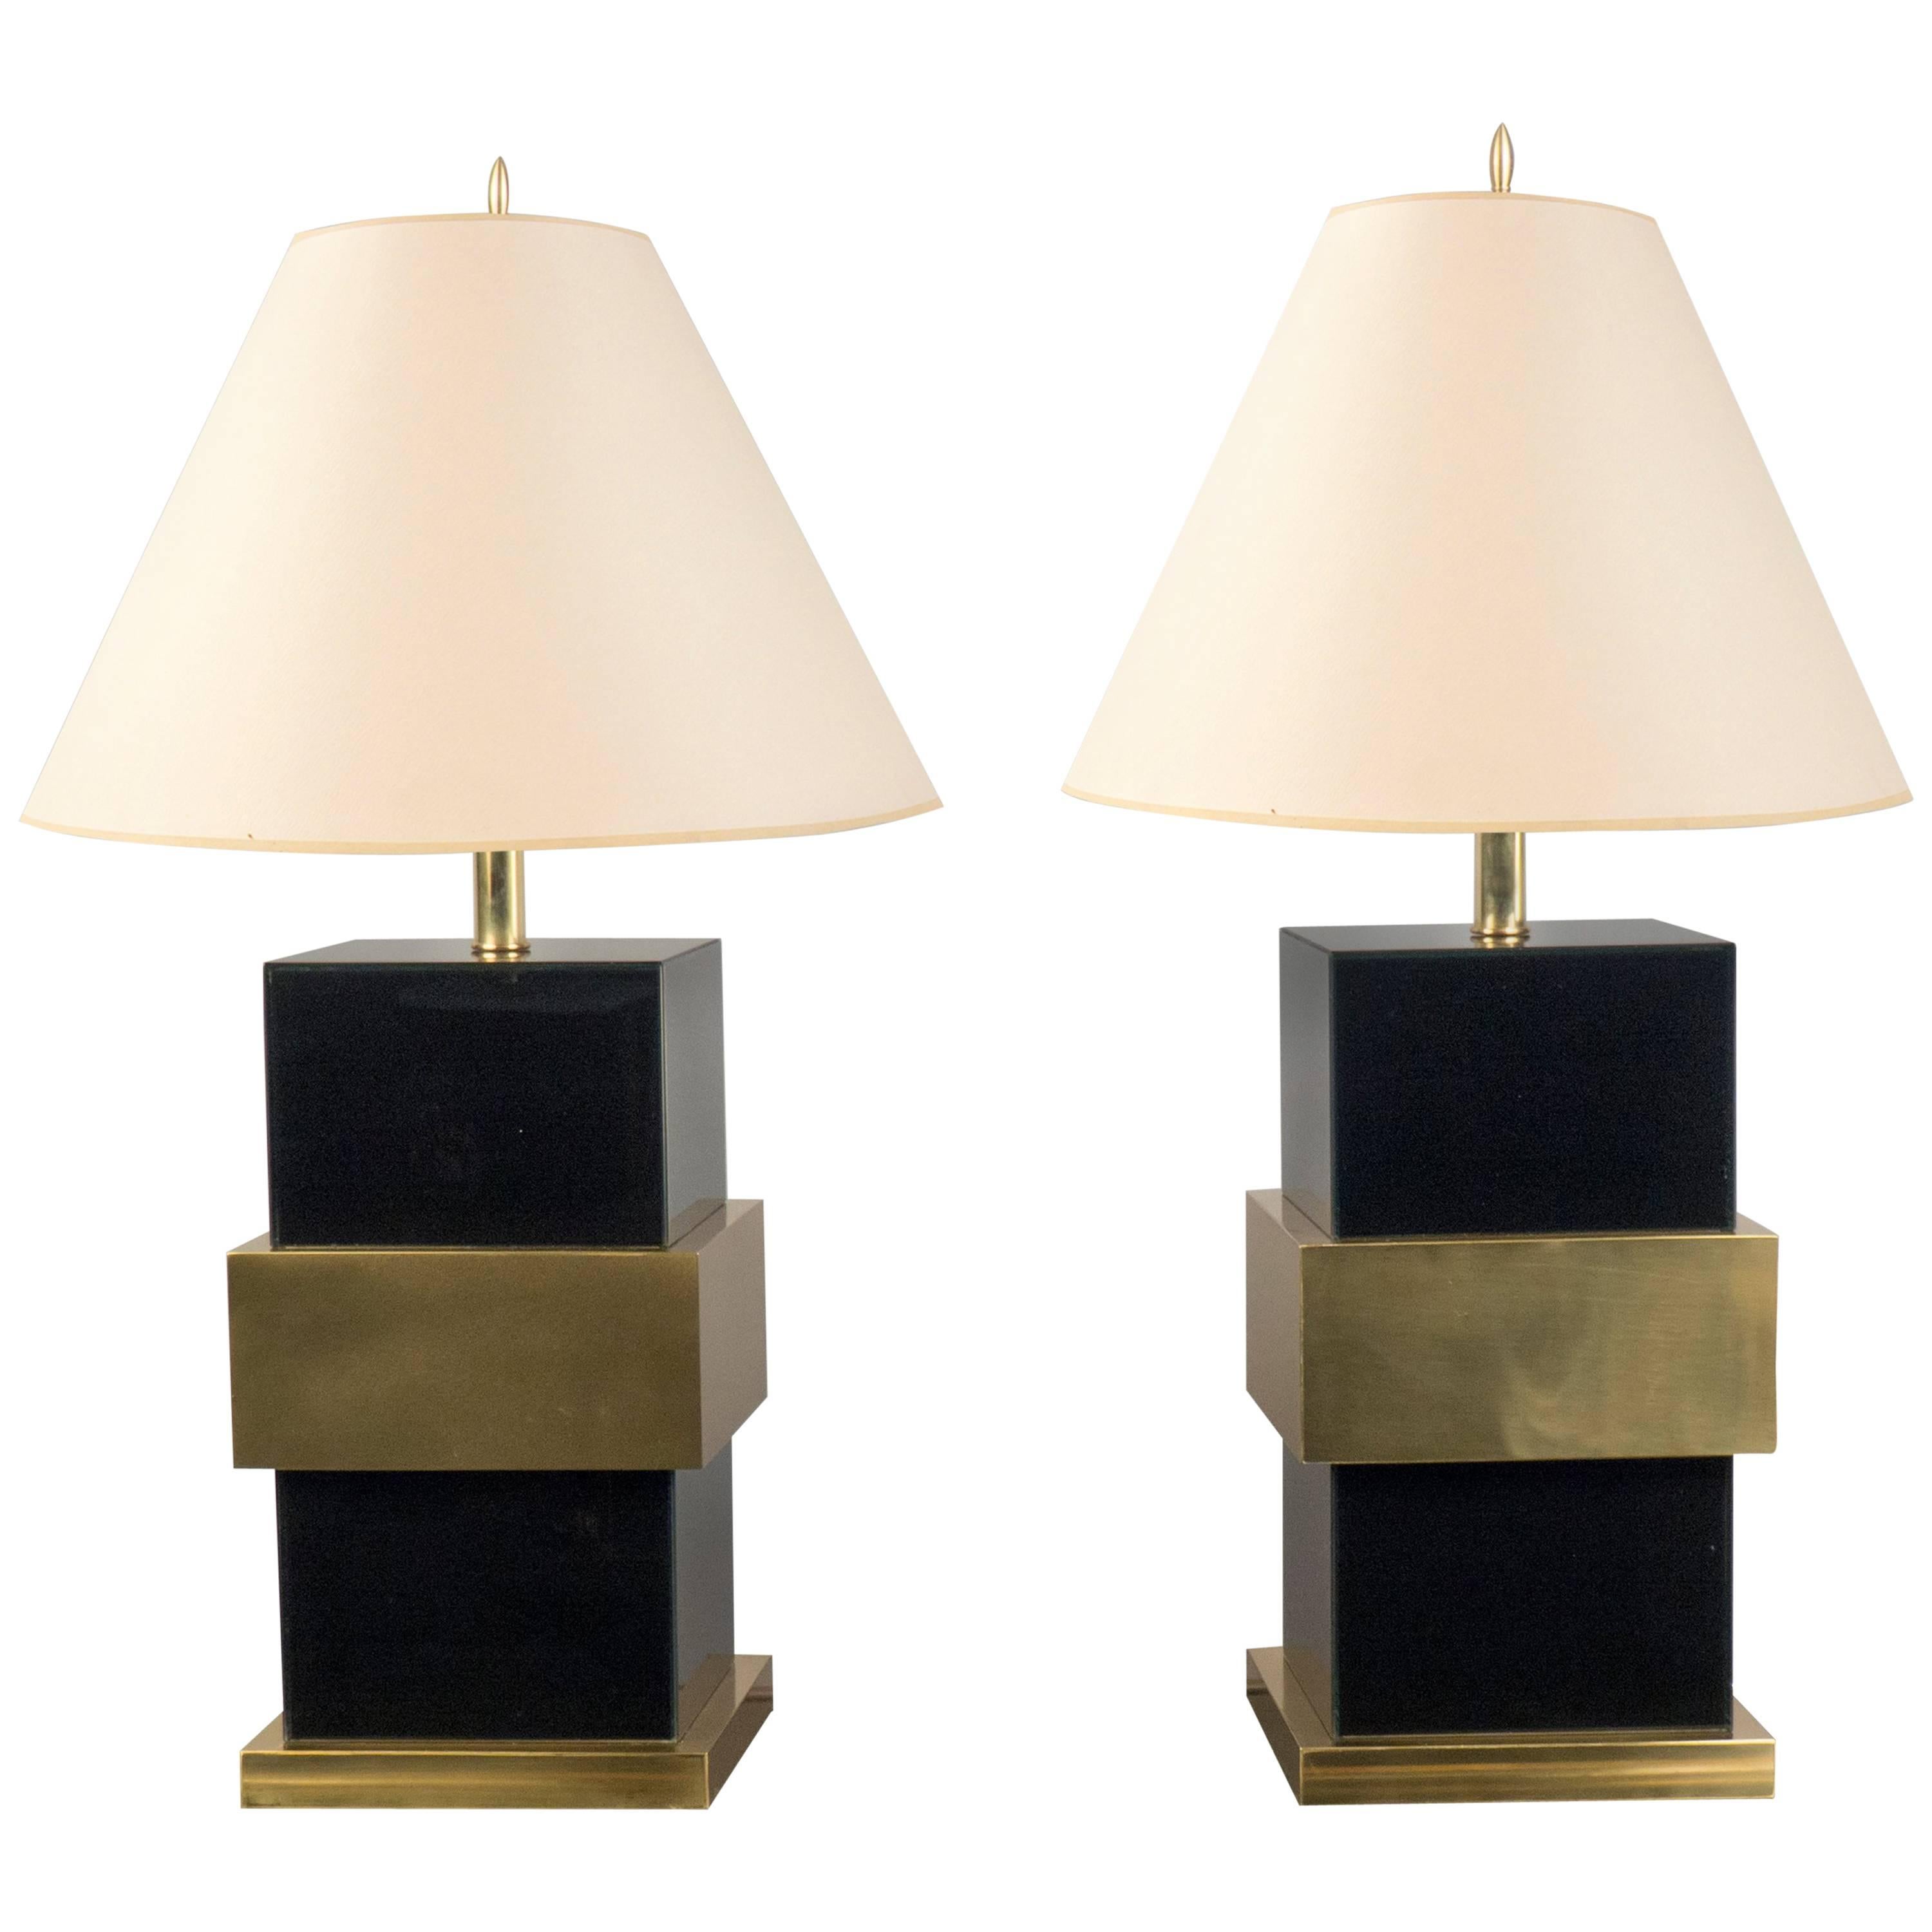 Pair of Table Lamps, Italy, 2017